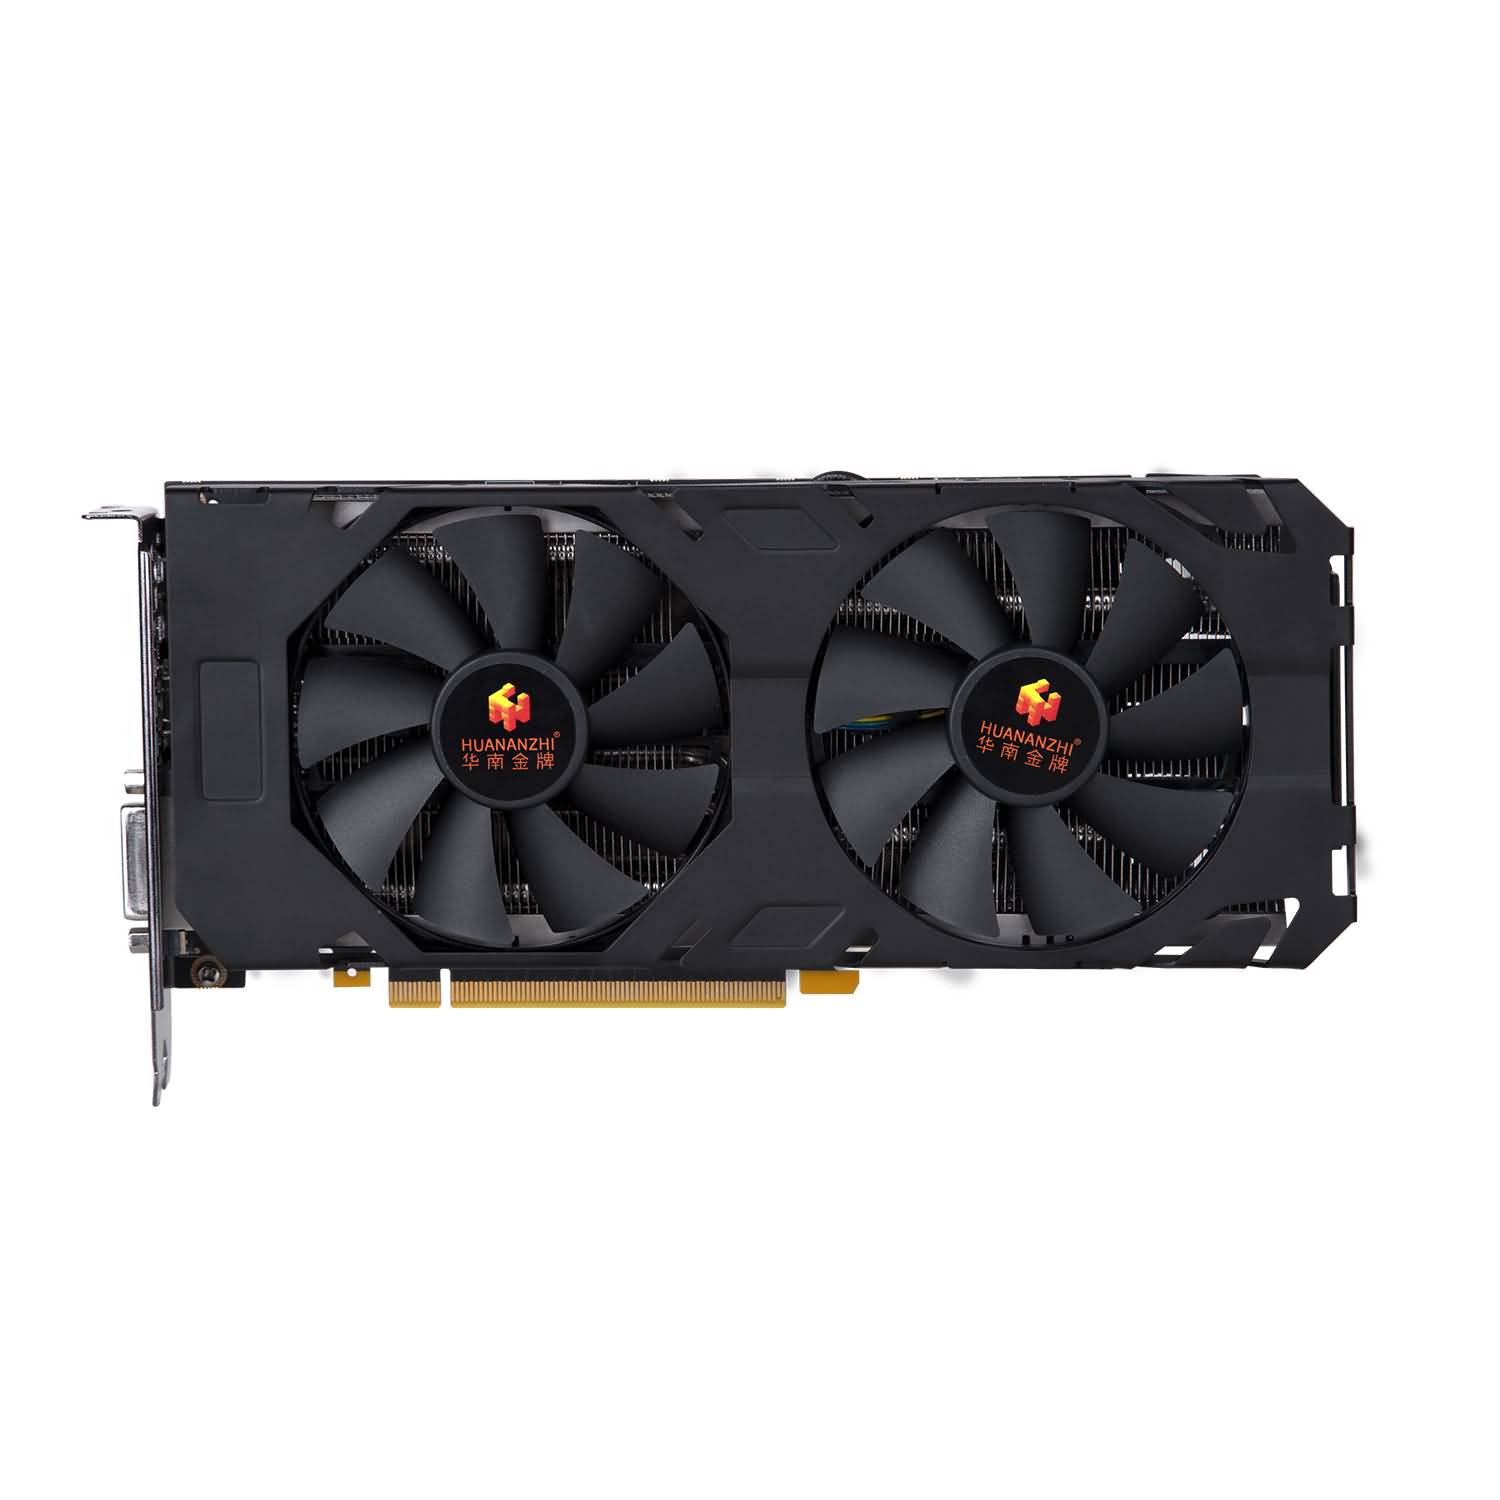 Download Huananzhi RTX2070 8G Graphics Card Free